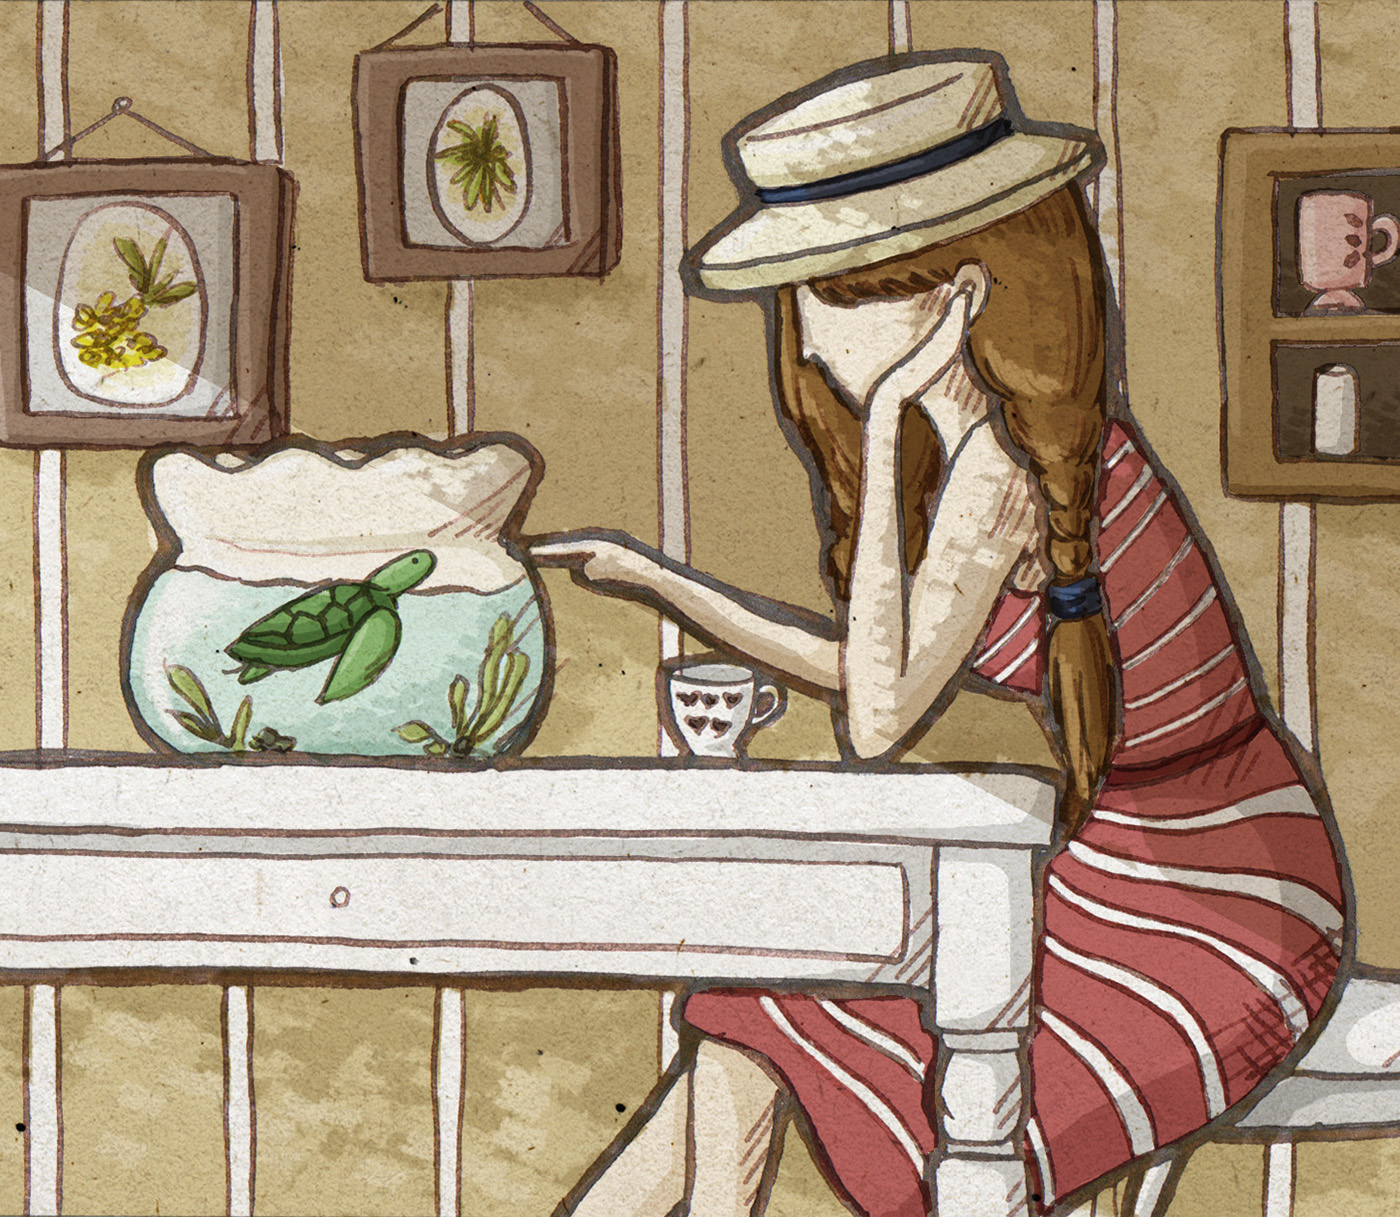 Illustrator photoshop ink slow movement countryside Turtle girl afternoon tea French france lifestyle